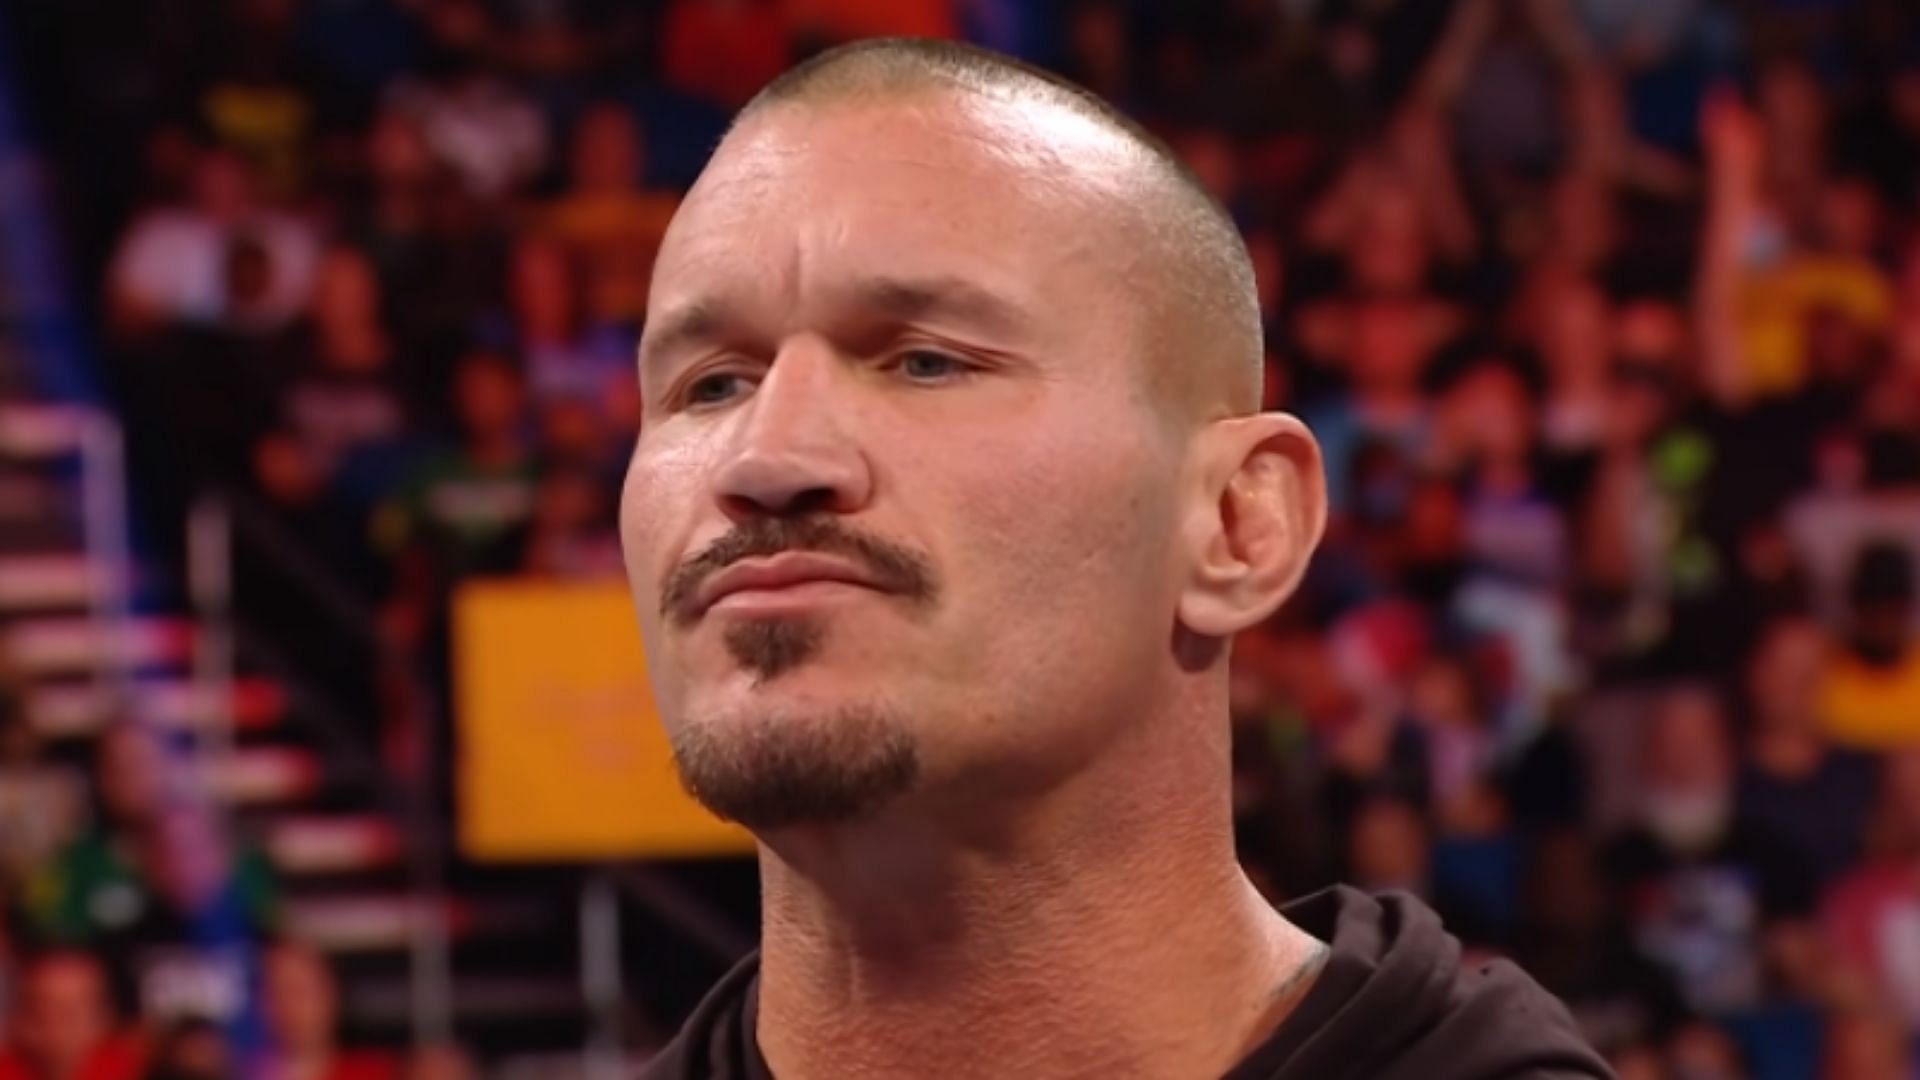 Randy Orton has performed on the main roster since 2002.